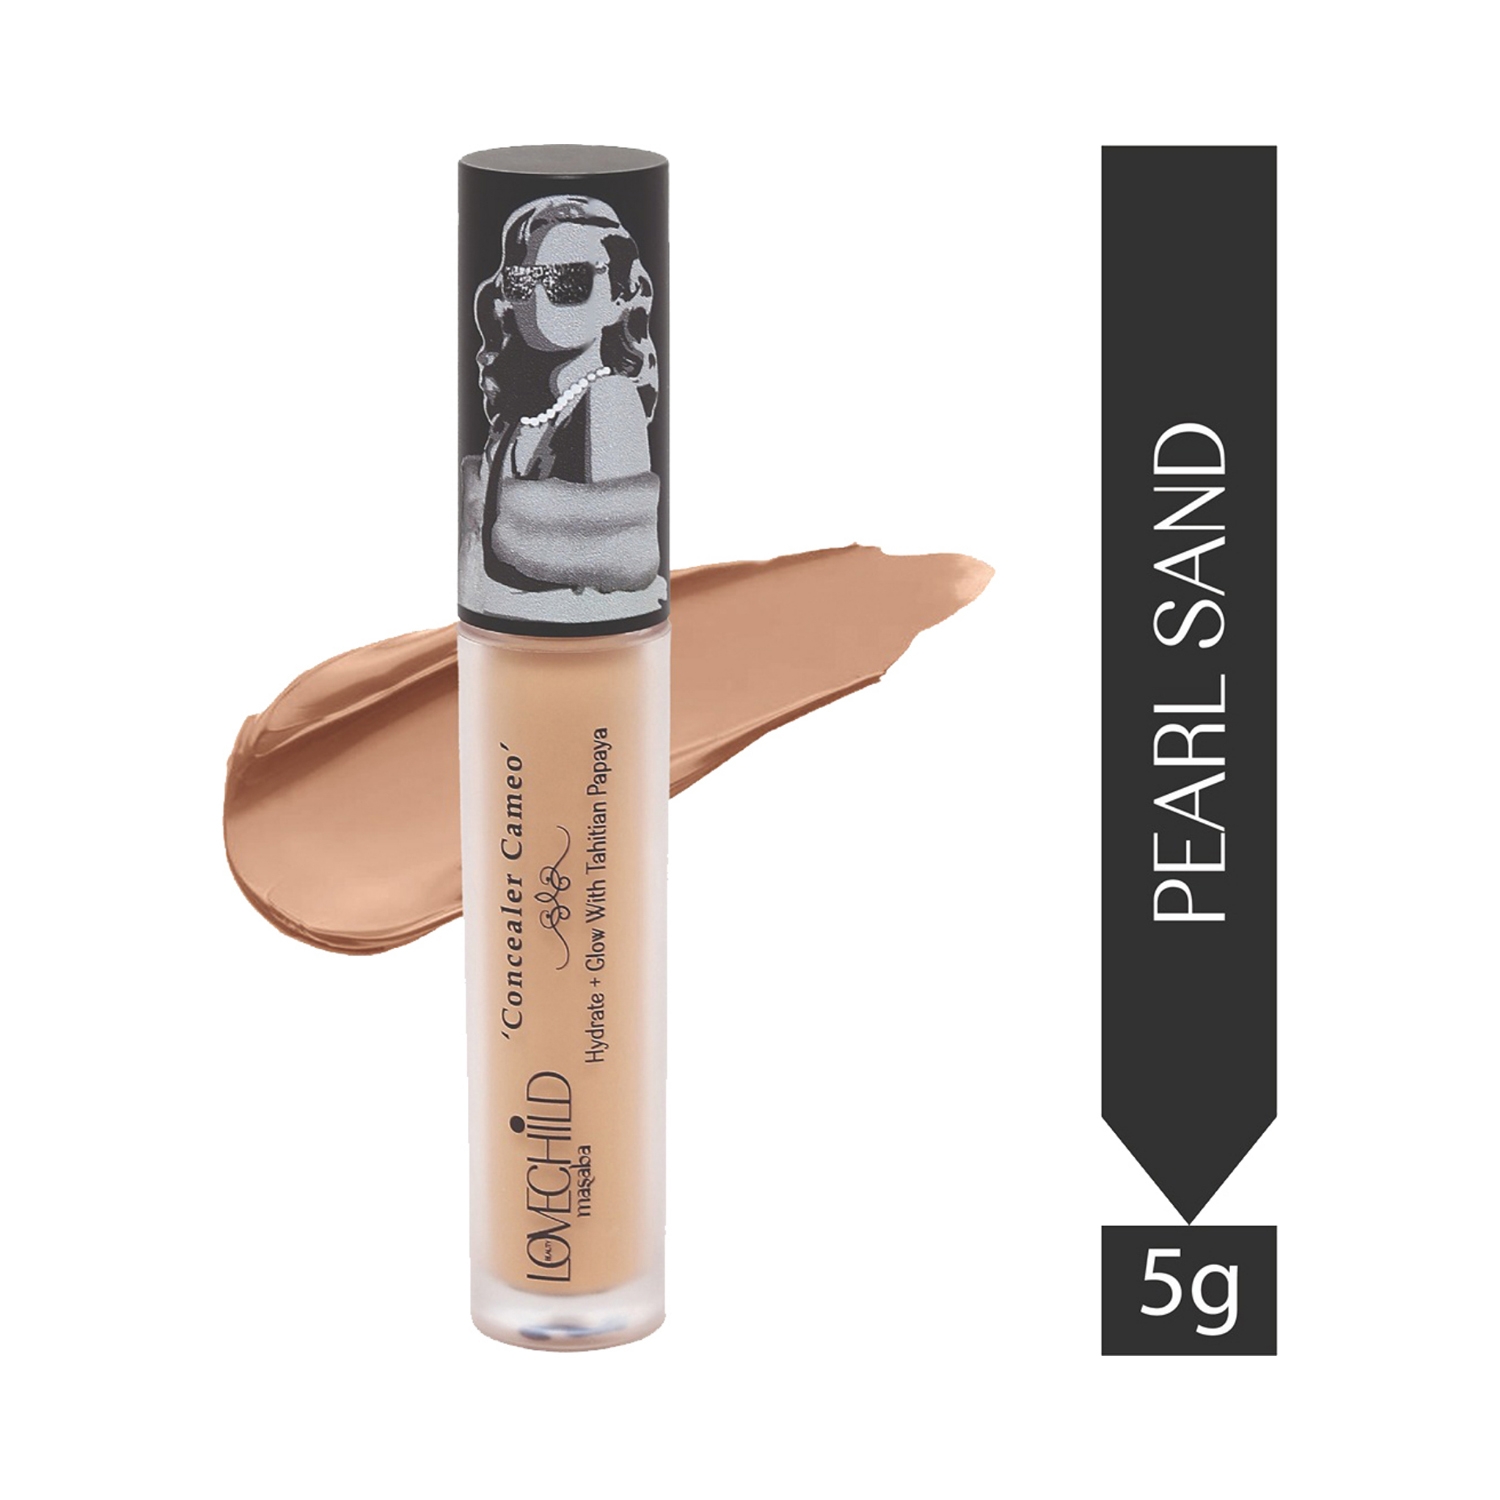 LoveChild Masaba | LoveChild Masaba Concealer Cameo - Pearl Sand (5g)